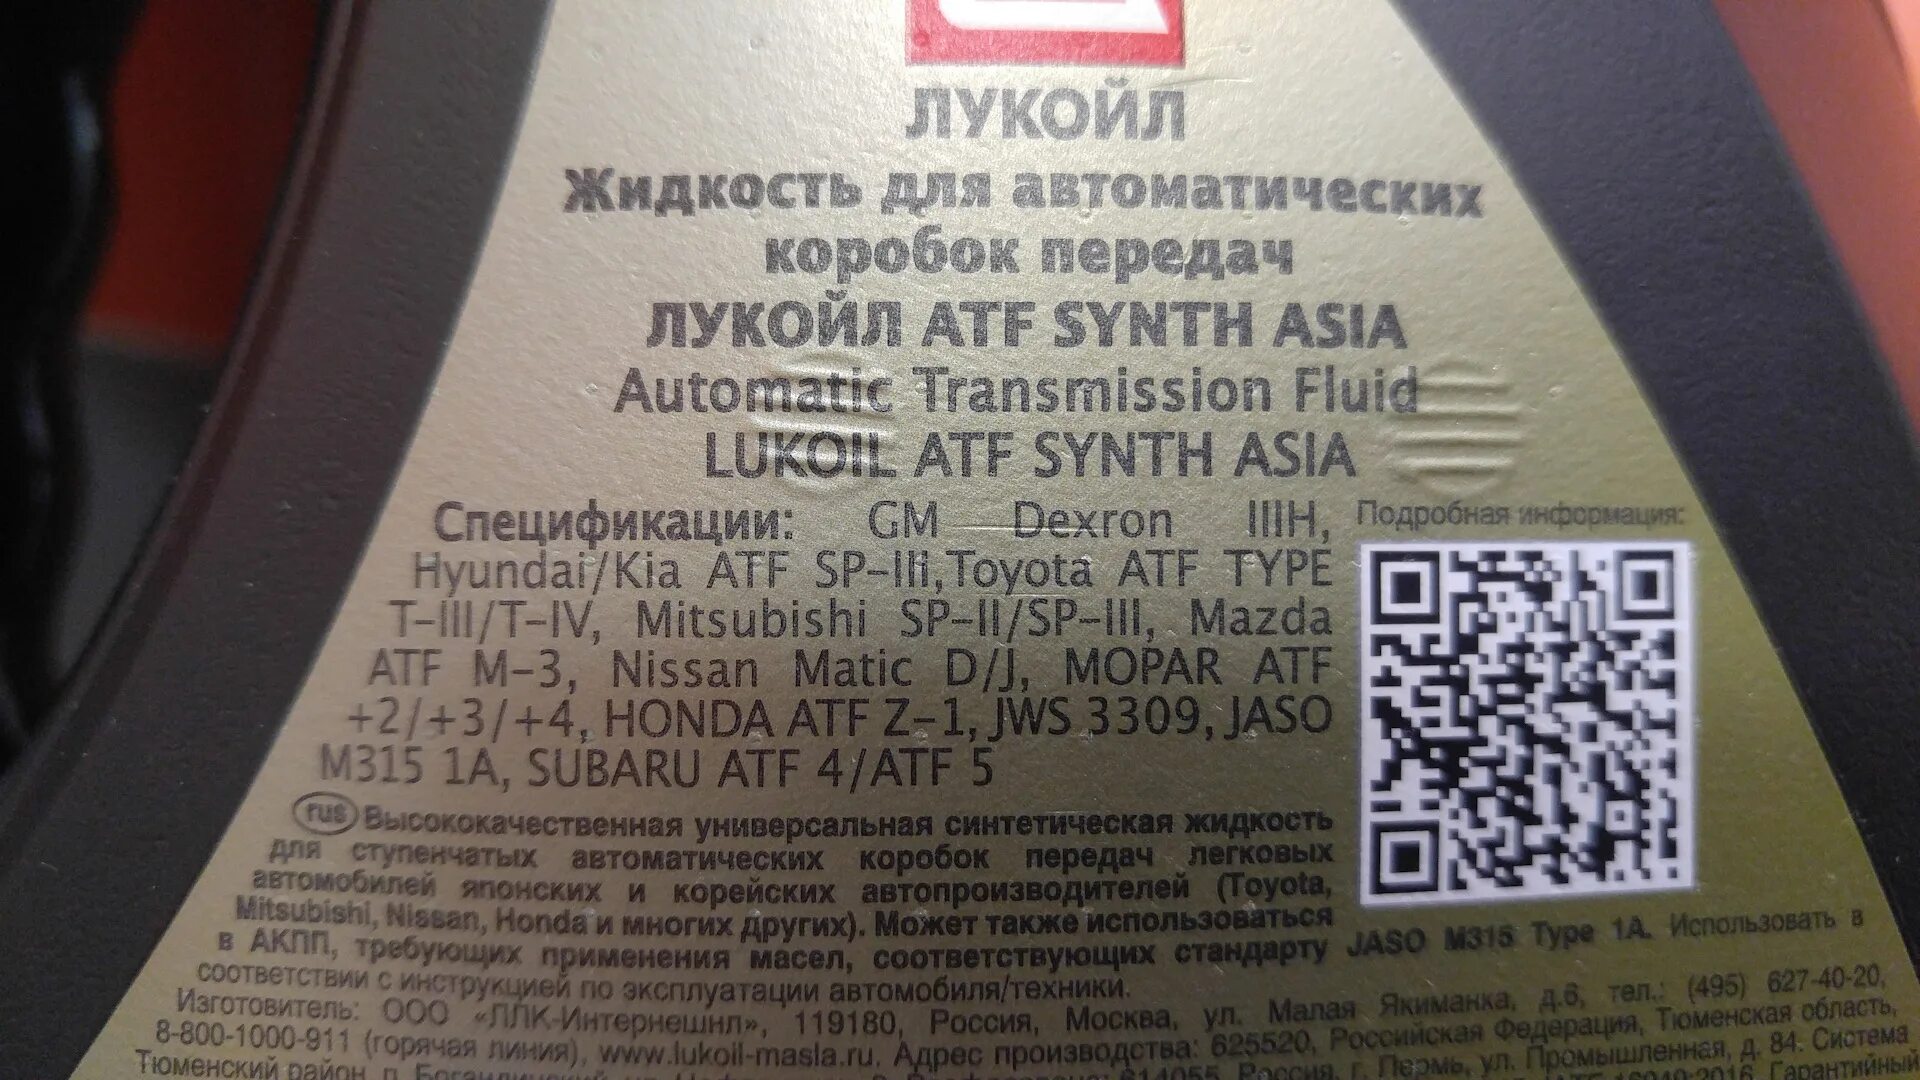 Лукойл ATF Synth Asia 4. 3132621 Лукойл ATF Synth Asia 4л. Lukoil ATF Synth Asia Mopar +4. Lukoil 191353. Лукойл asia